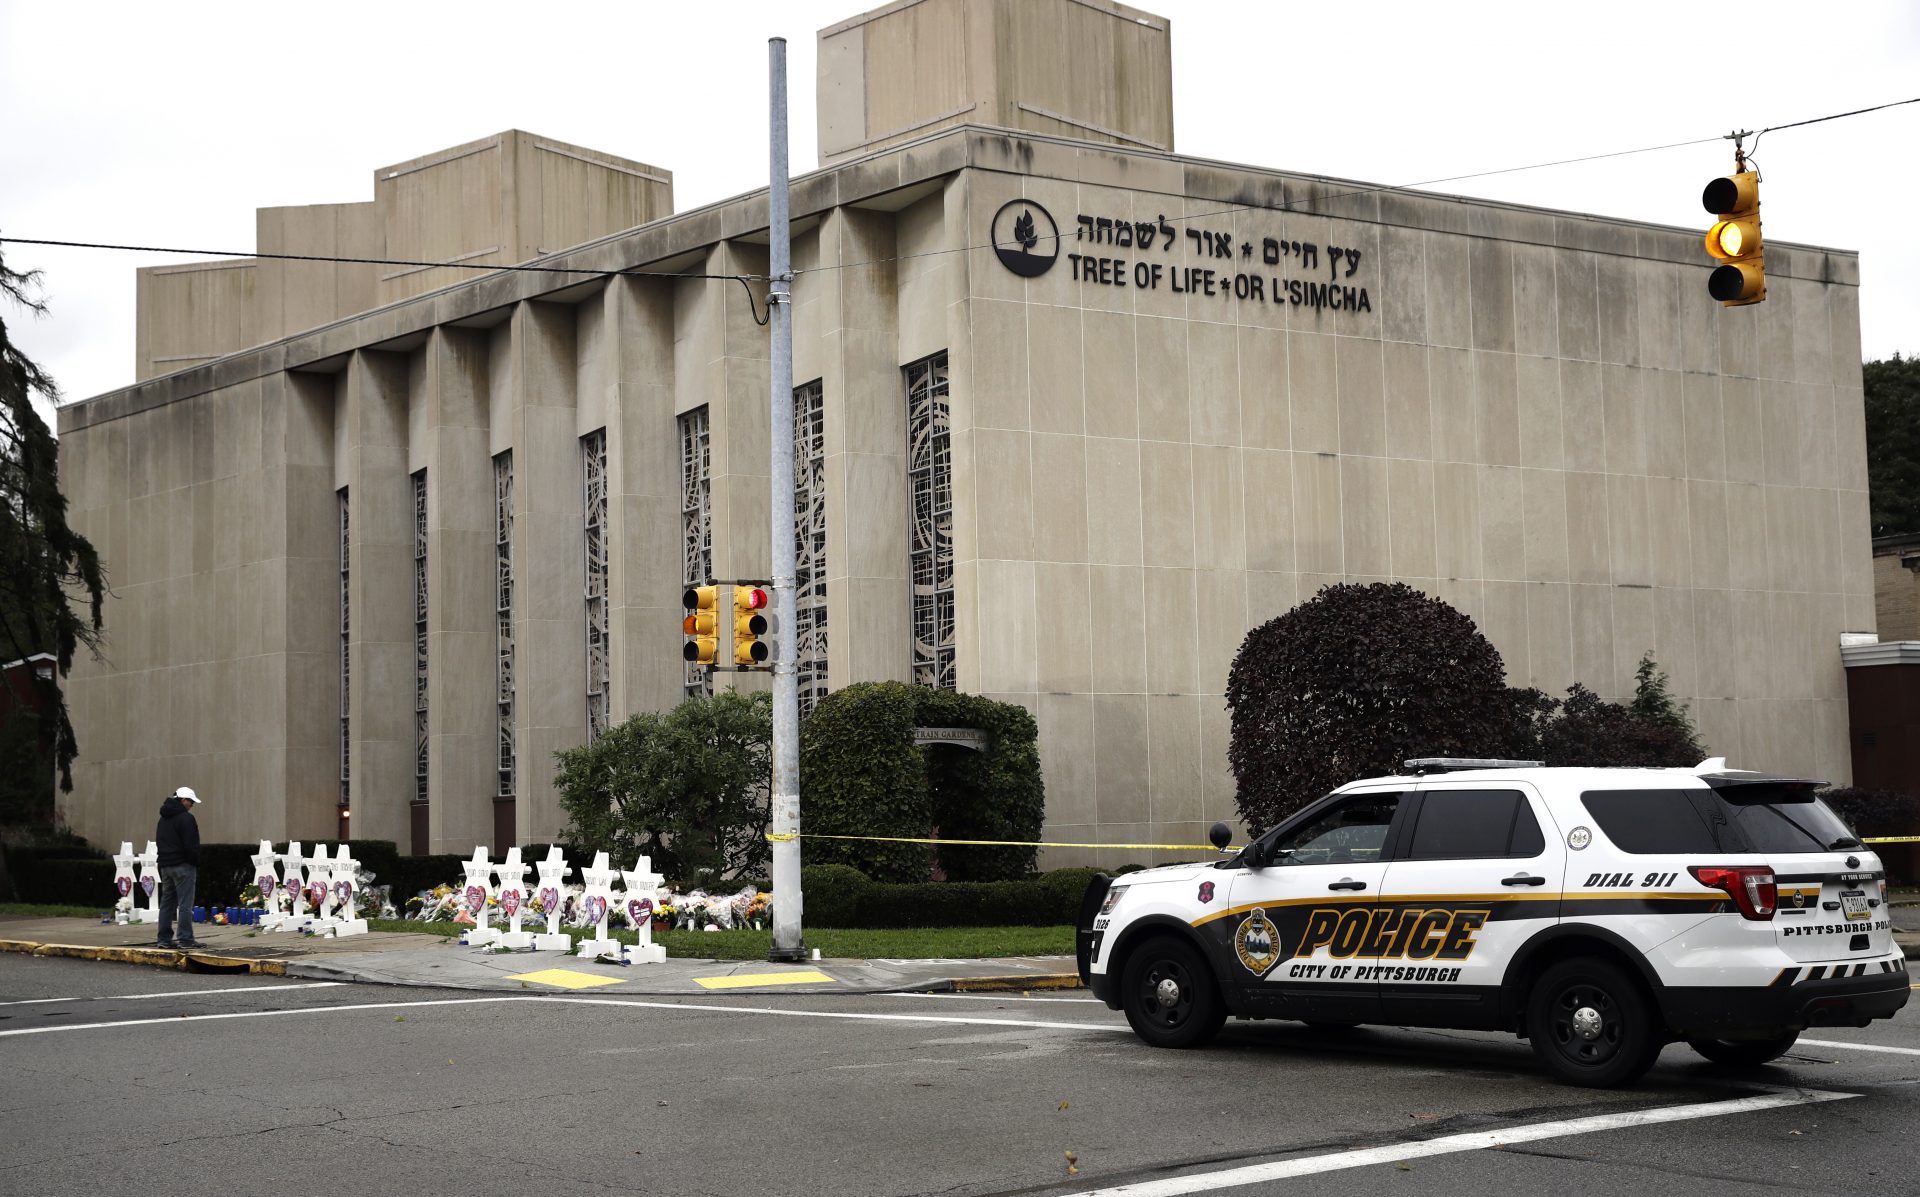 A police vehicle is posted near the Tree of Life/Or L'Simcha Synagogue in Pittsburgh, Monday, Oct. 29, 2018. The U.S. attorney's office in Pittsburgh filed a notice of intent Monday to seek the death penalty against Robert Bowers in the October 2018 attack.